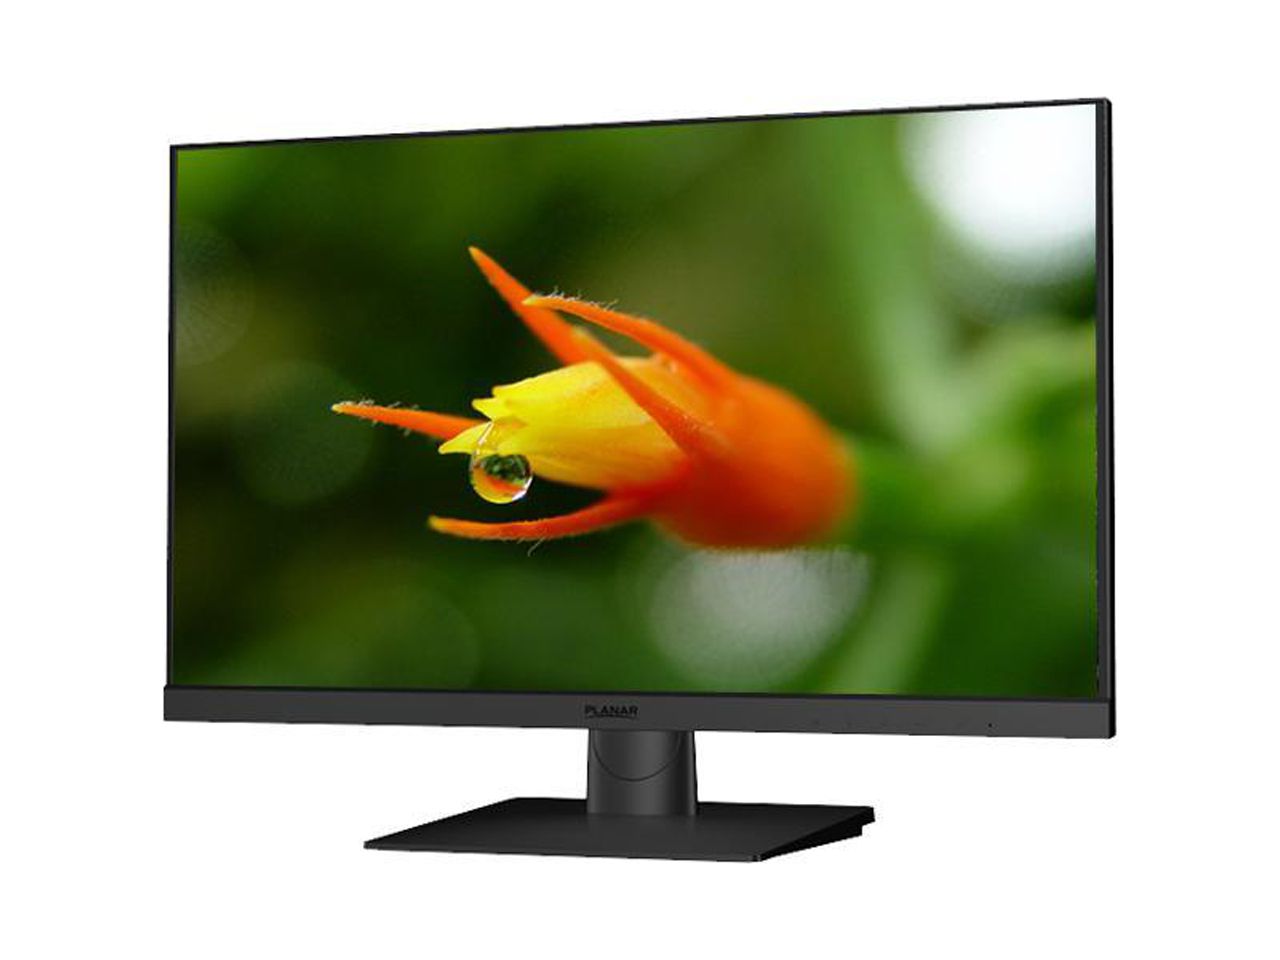 Planar PXN2490MW 24" (Actual size 23.8") Quad HD 2560 x 1440 2K Resolution 6 ms HDMI DisplayPort DVI-D Built-in Speakers Nearly Borderless Bezel Backlit LED IPS Monitor - image 1 of 2